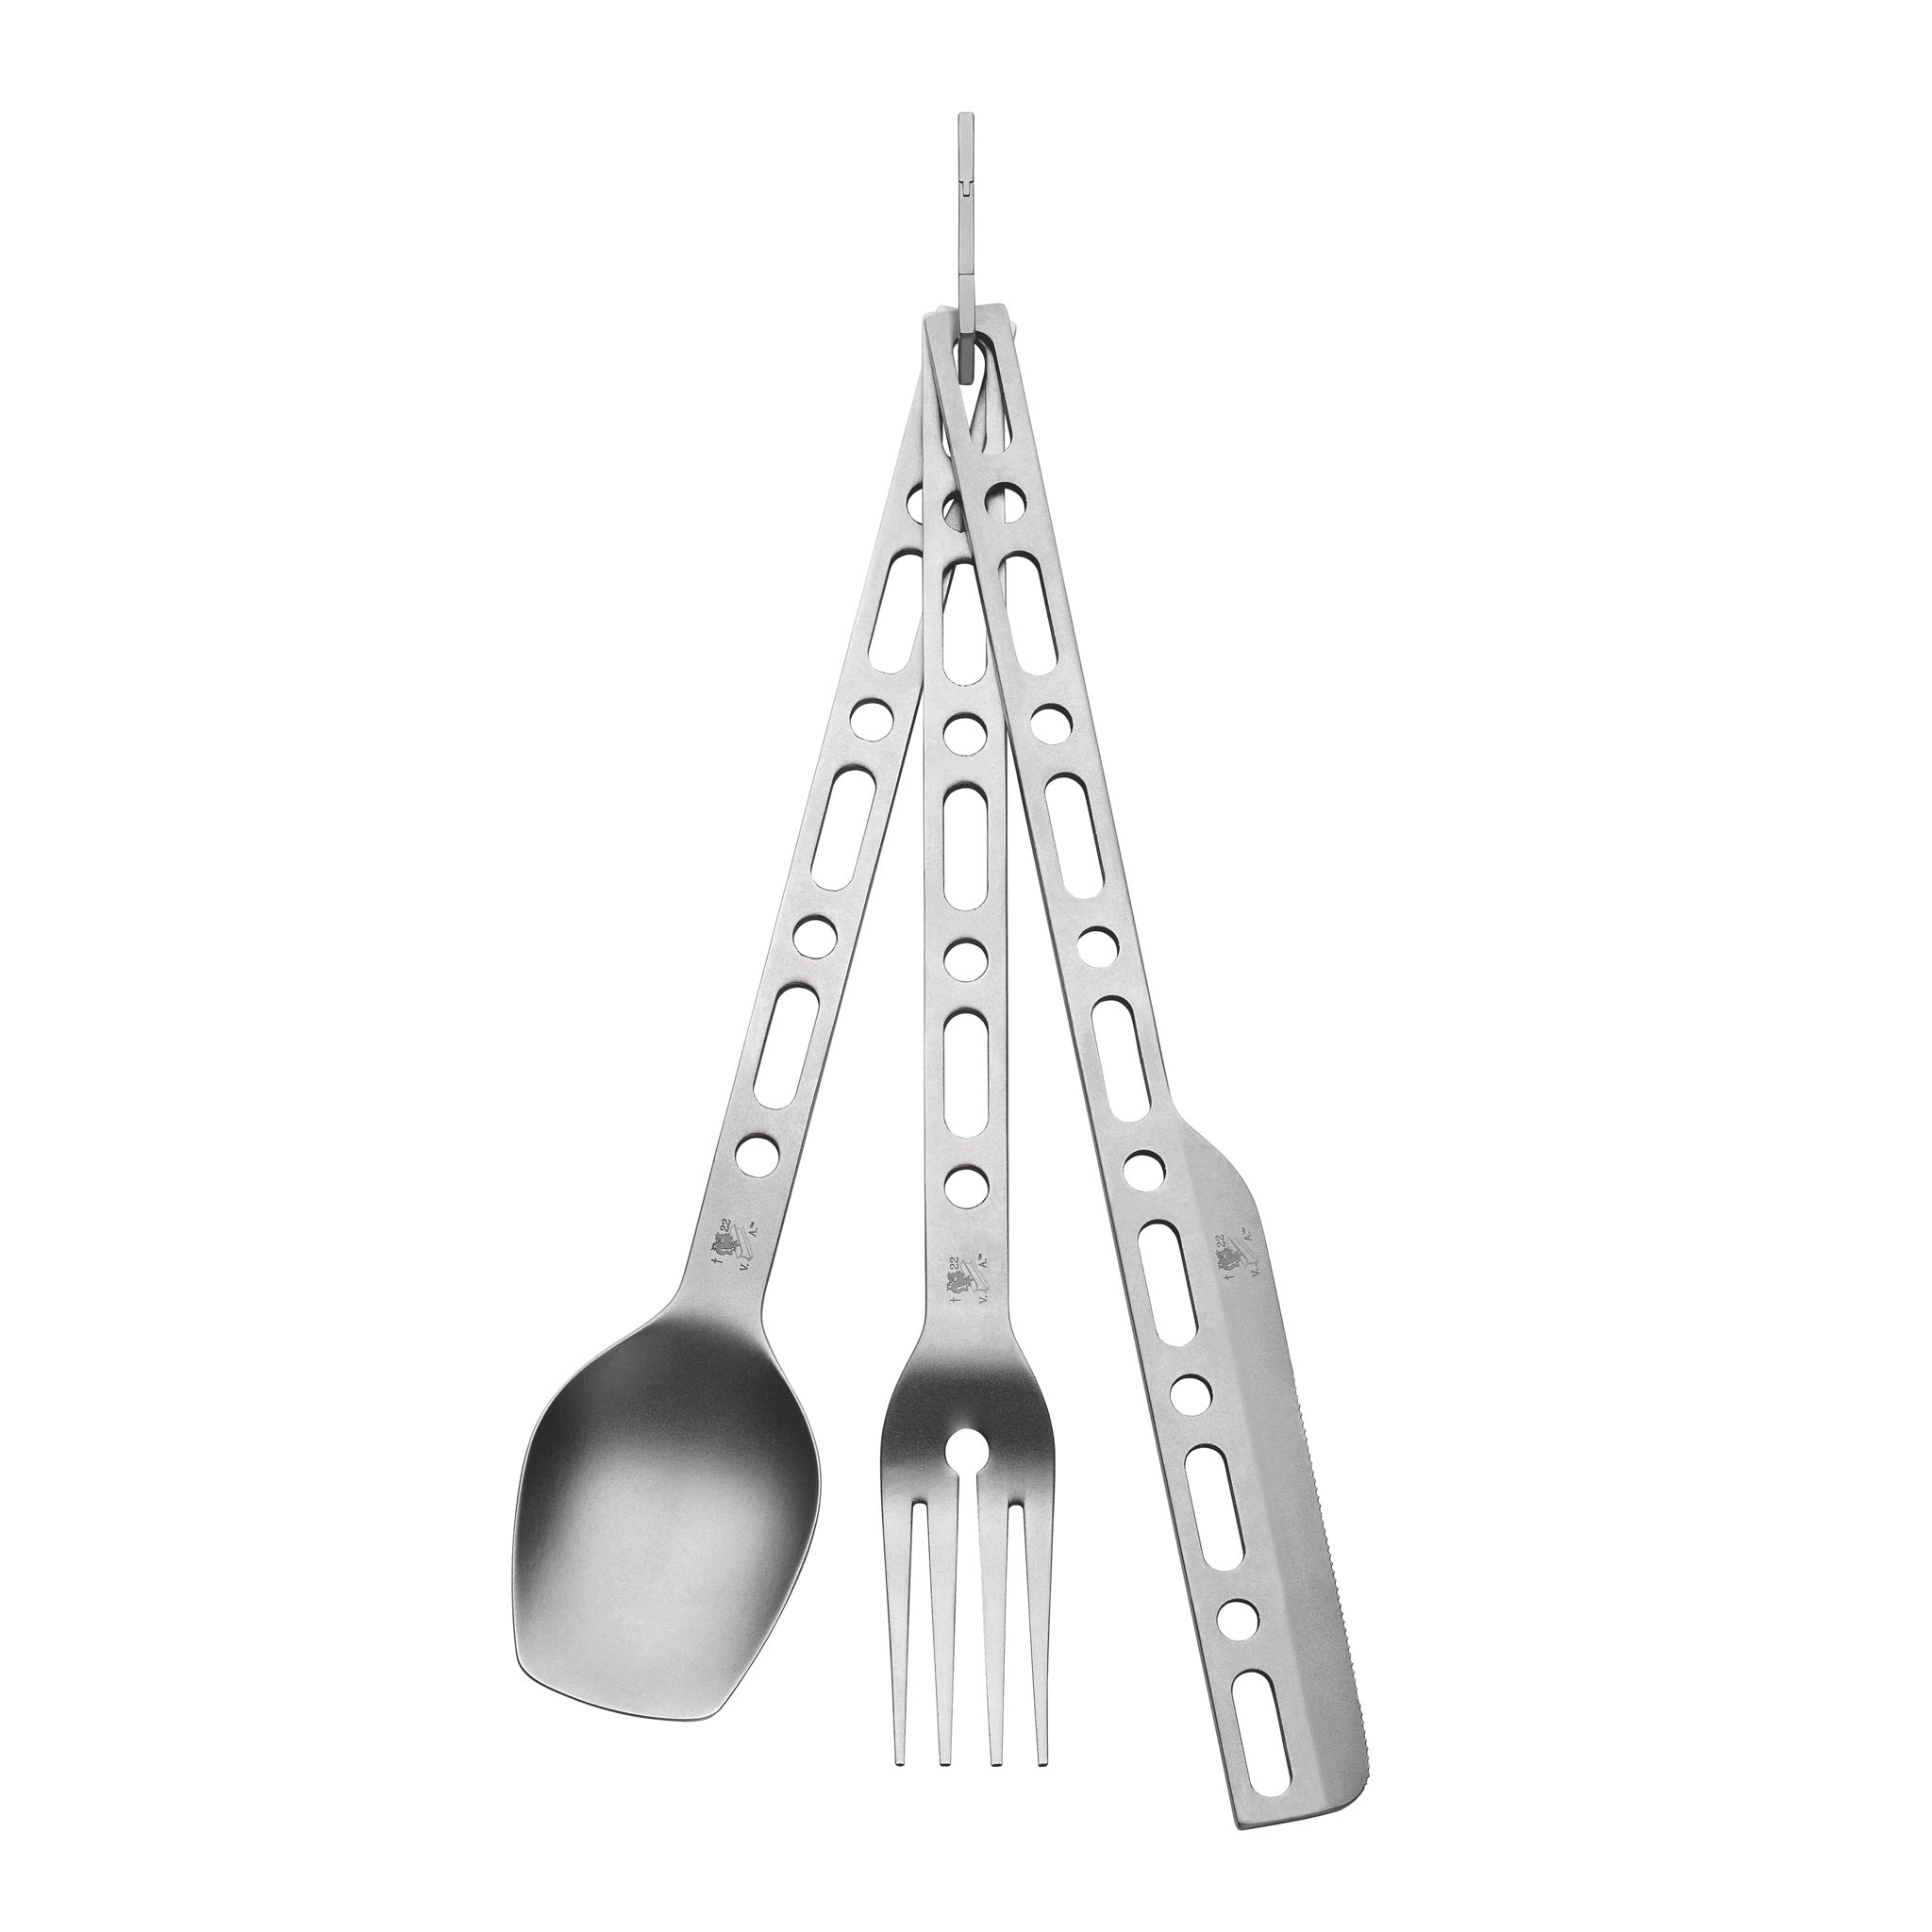 Jane　Set　Alessi　'Occasional　–　Virgil　Object'　Richards　Abloh　Cutlery　Interiors